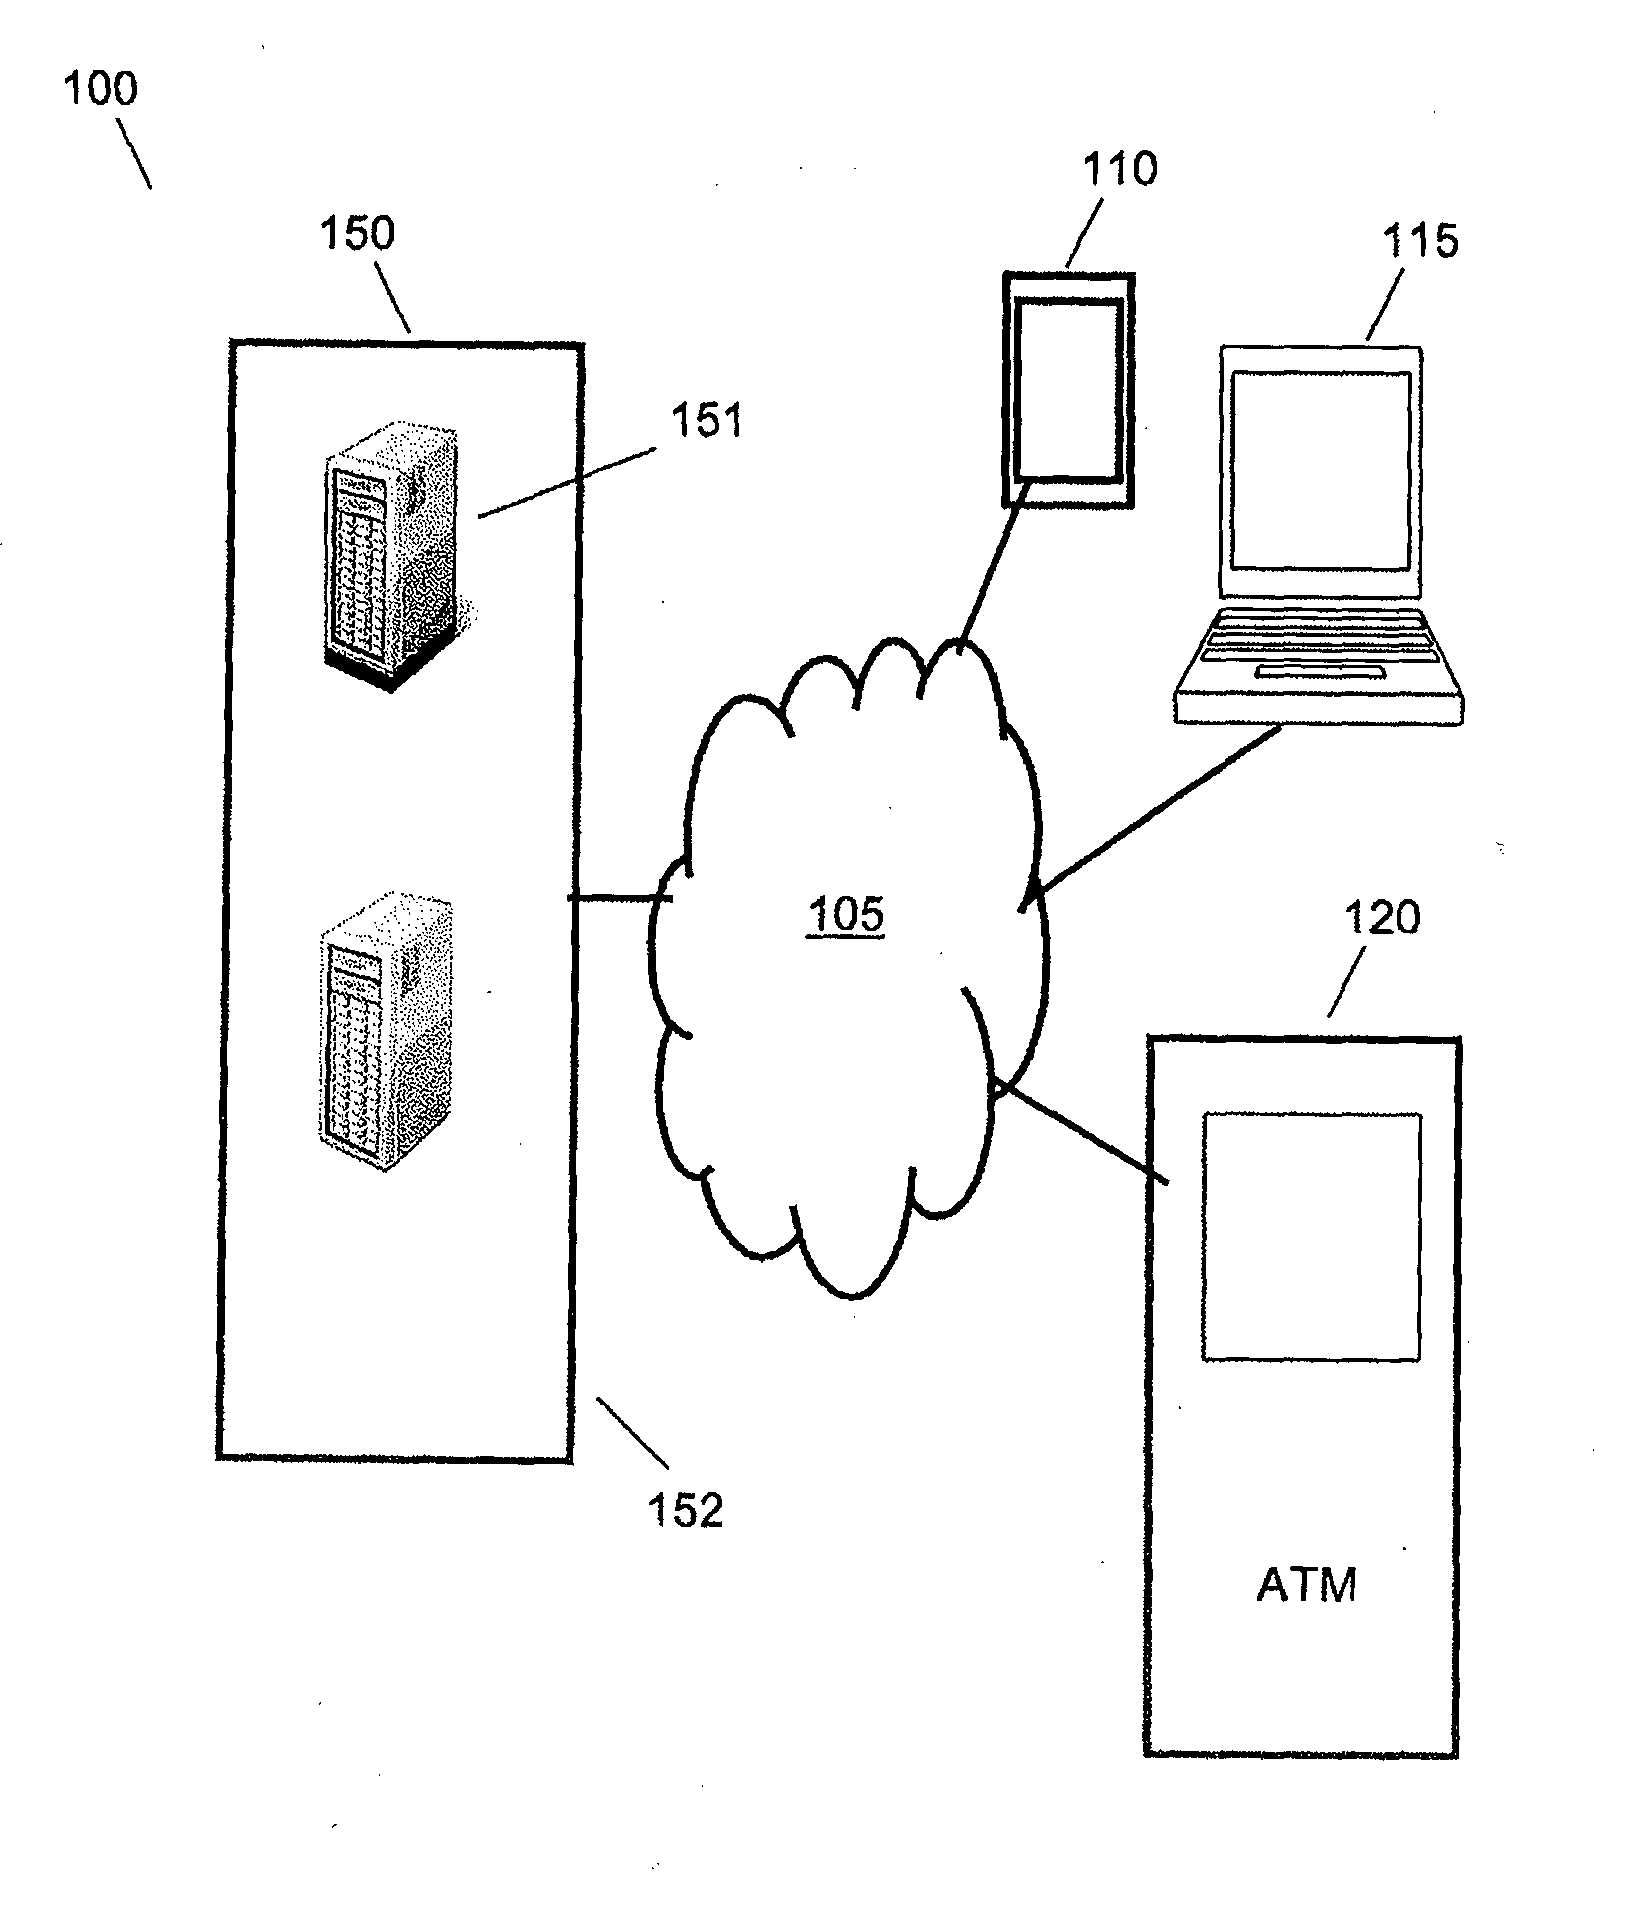 Method and System for Protecting a Password During an Authentication Process